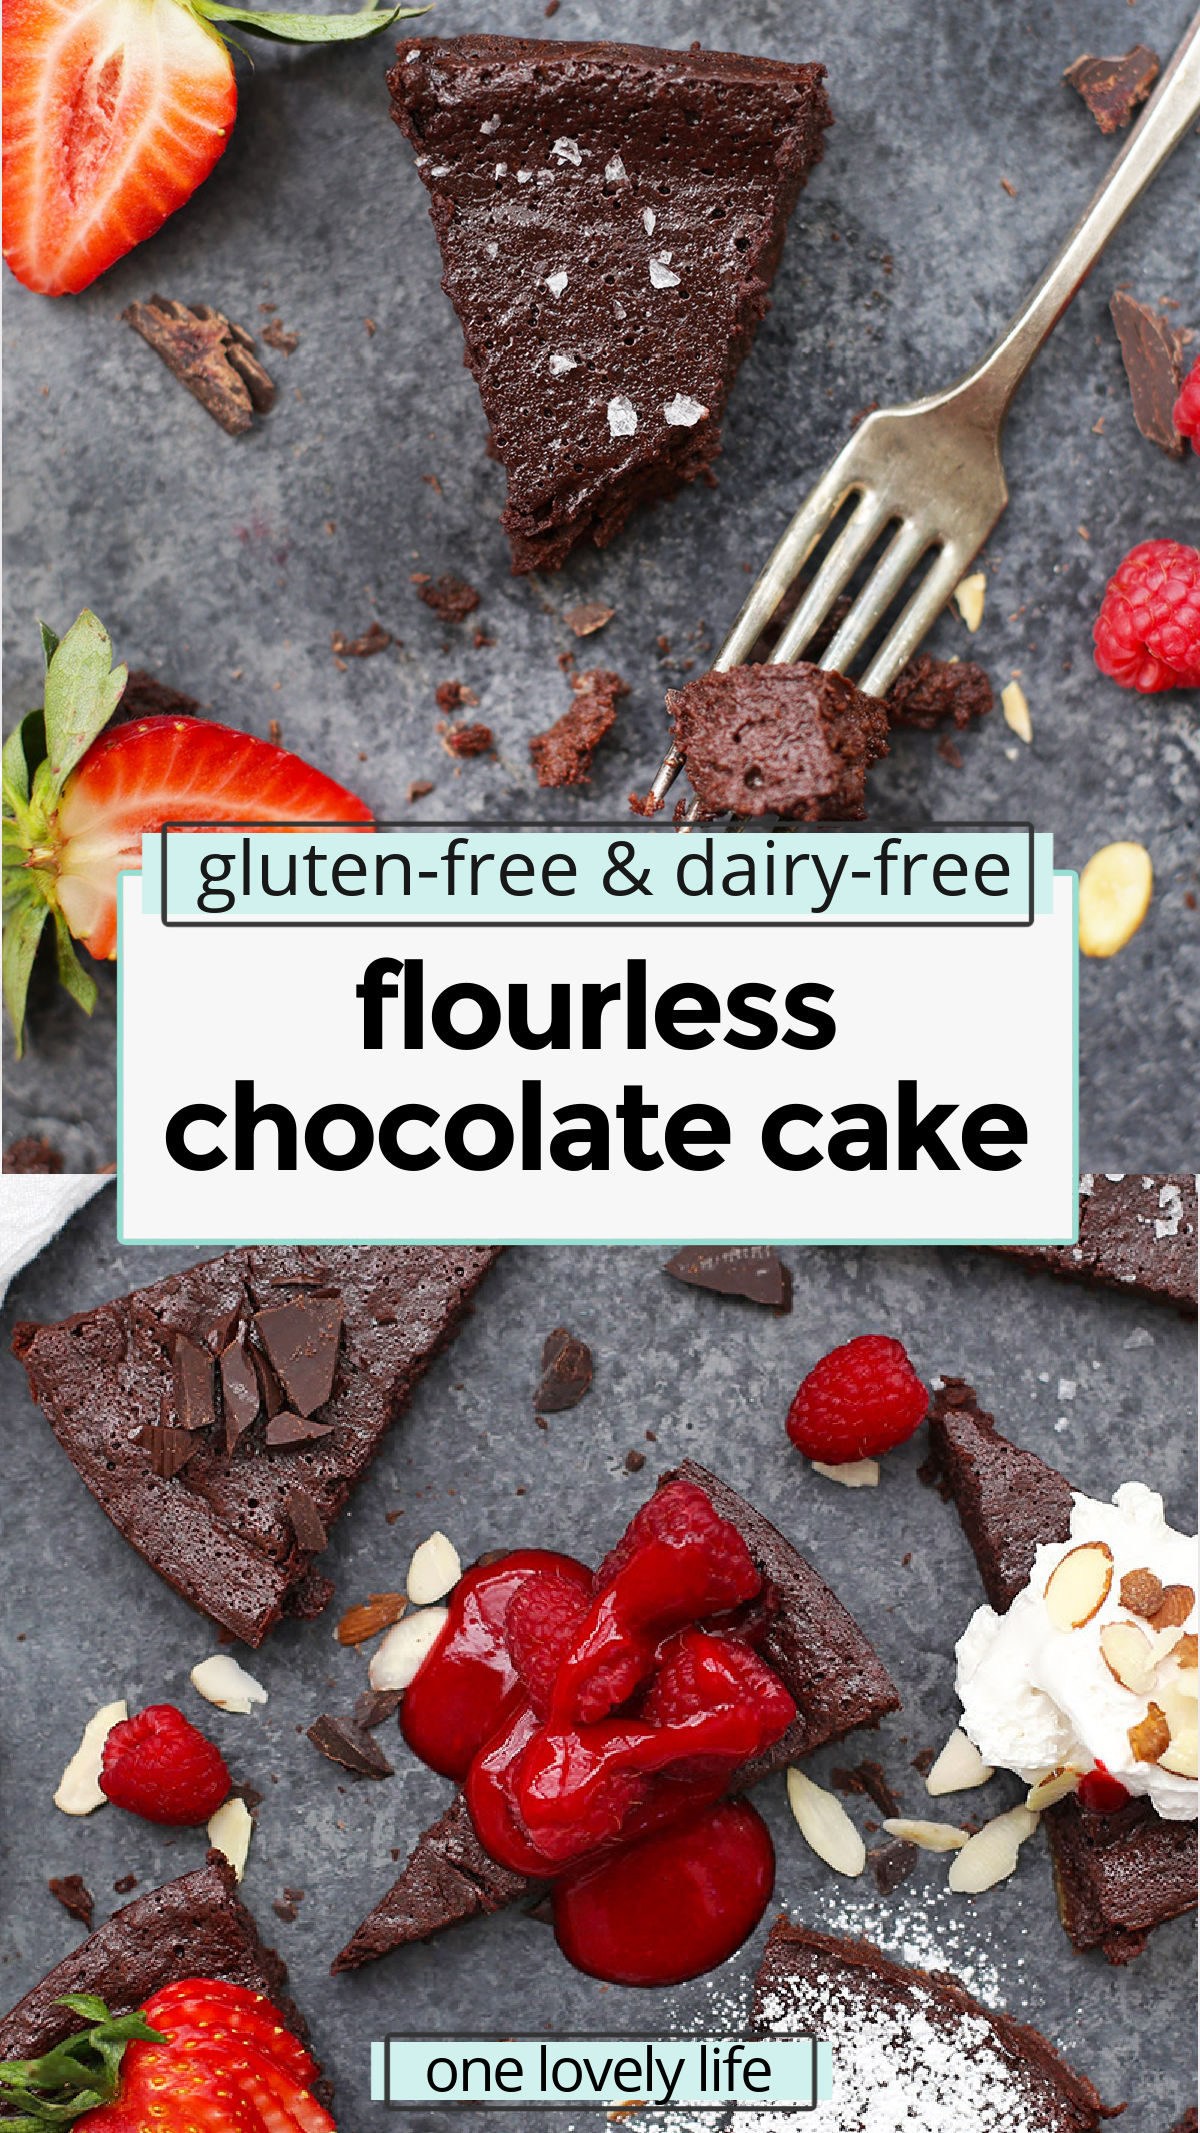 Flourless Chocolate Cake - This dense, perfectly rich chocolate cake is gluten free, dairy free, and naturally sweetened, but has all the indulgent decadence you're looking for on a special occasion. Pro tip: don't skip the raspberry sauce! // dairy free flourless chocolate cake recipe // paleo flourless chocolate cake // gluten free flourless chocolate cake // paleo chocolate cake // gluten free chocolate cake